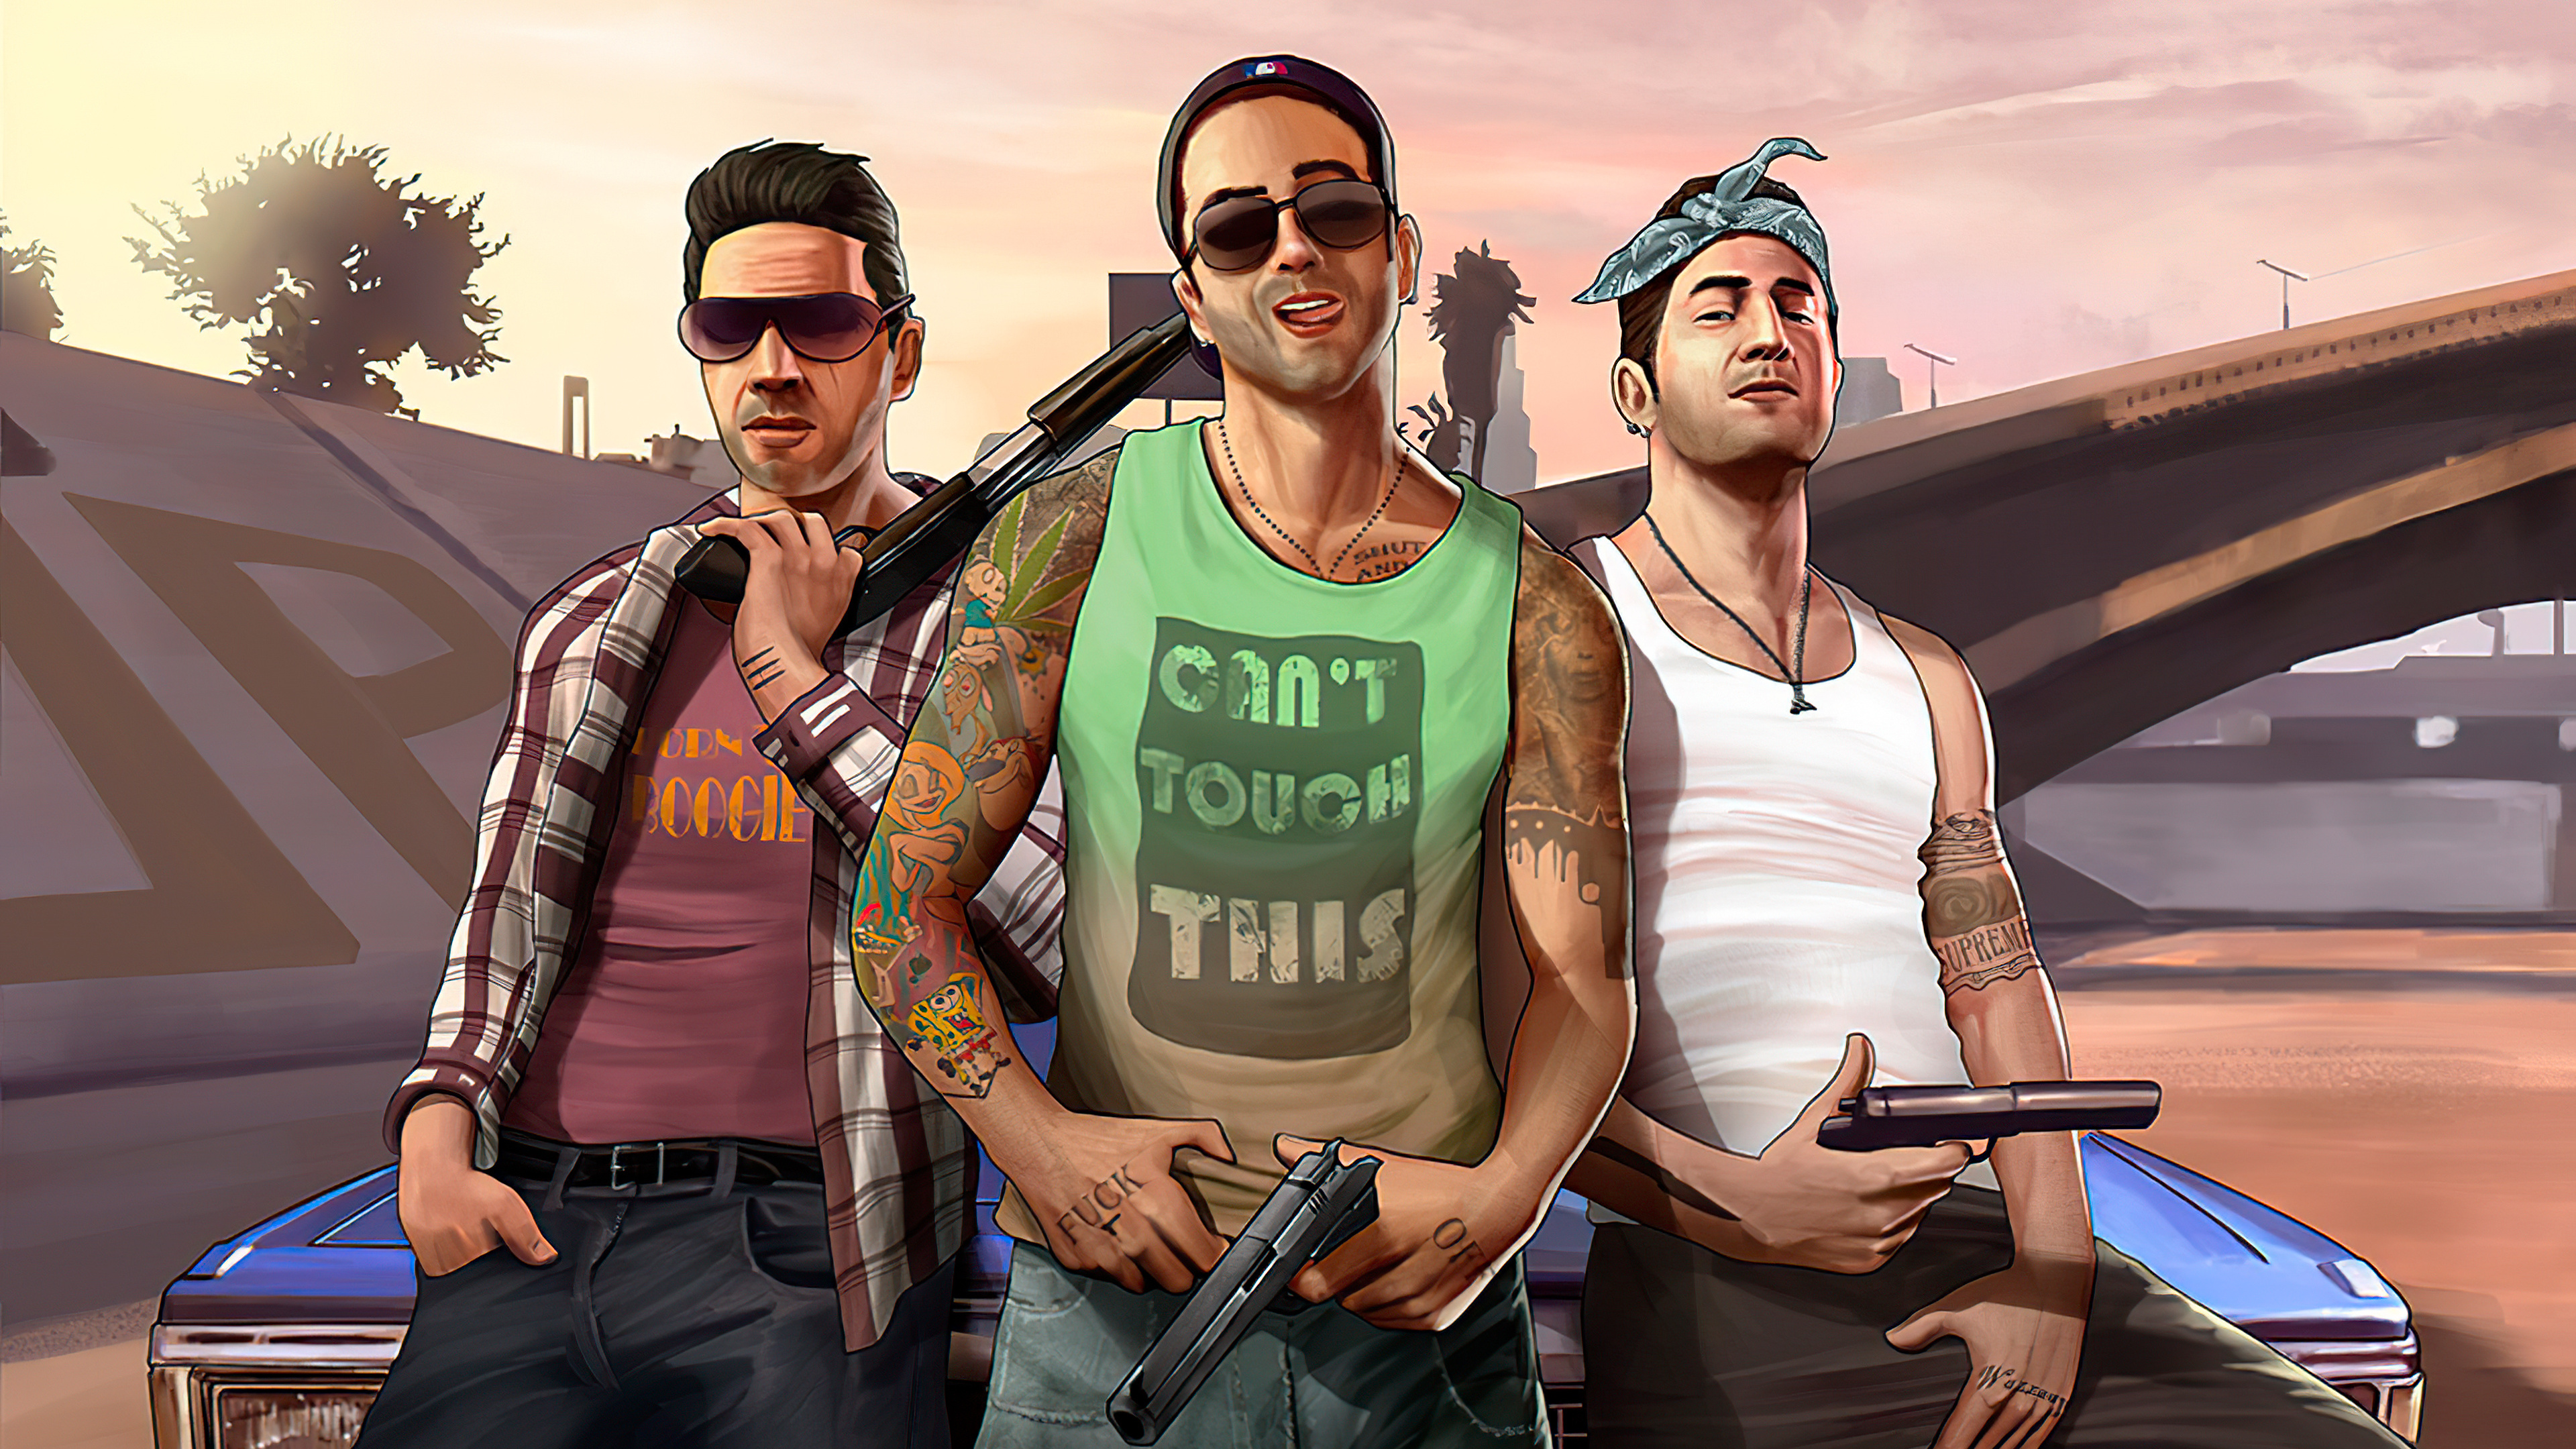 Chillin With The Homies, Grand Theft Auto v, Rockstar Games, Human, Eyewear. Wallpaper in 3840x2160 Resolution